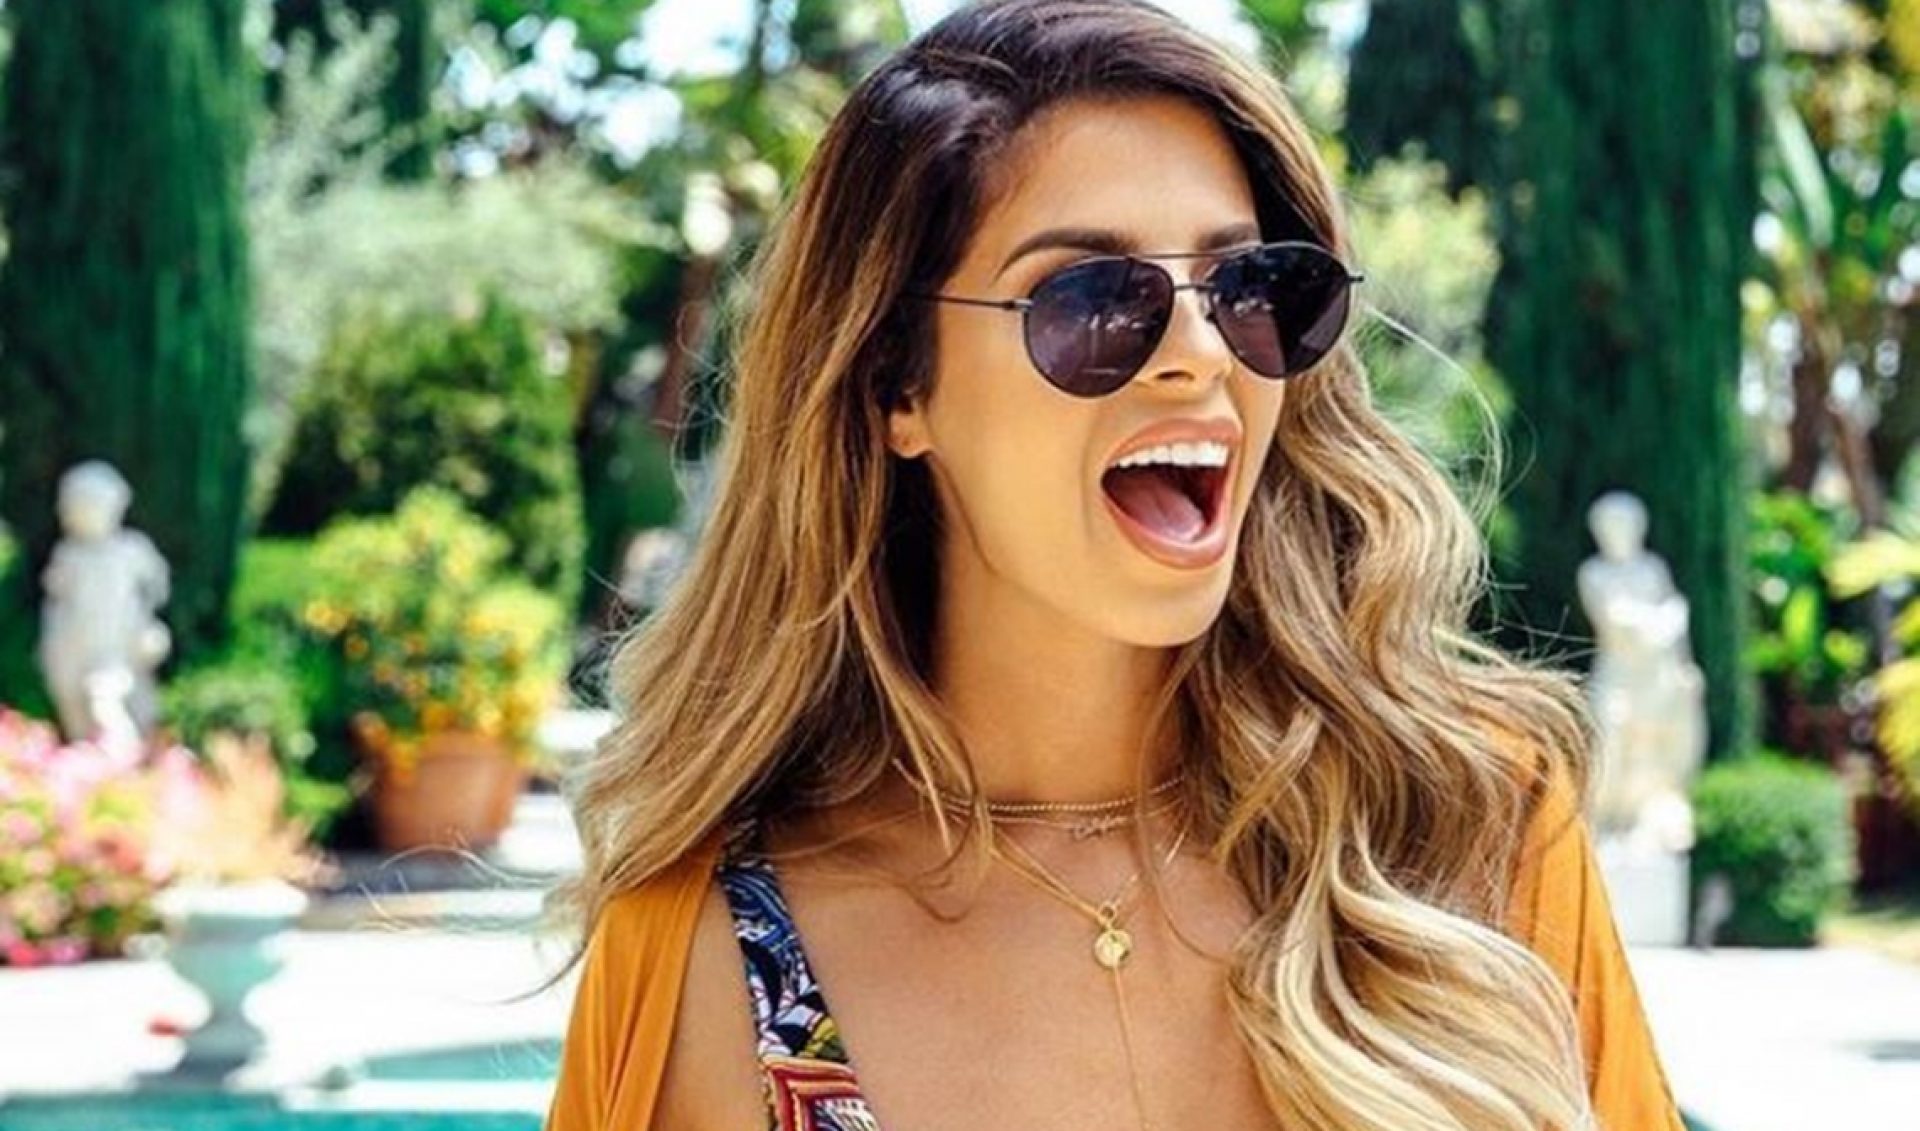 Beauty YouTuber Laura Lee Launches Sunglass Collaboration With Diff Eyewear